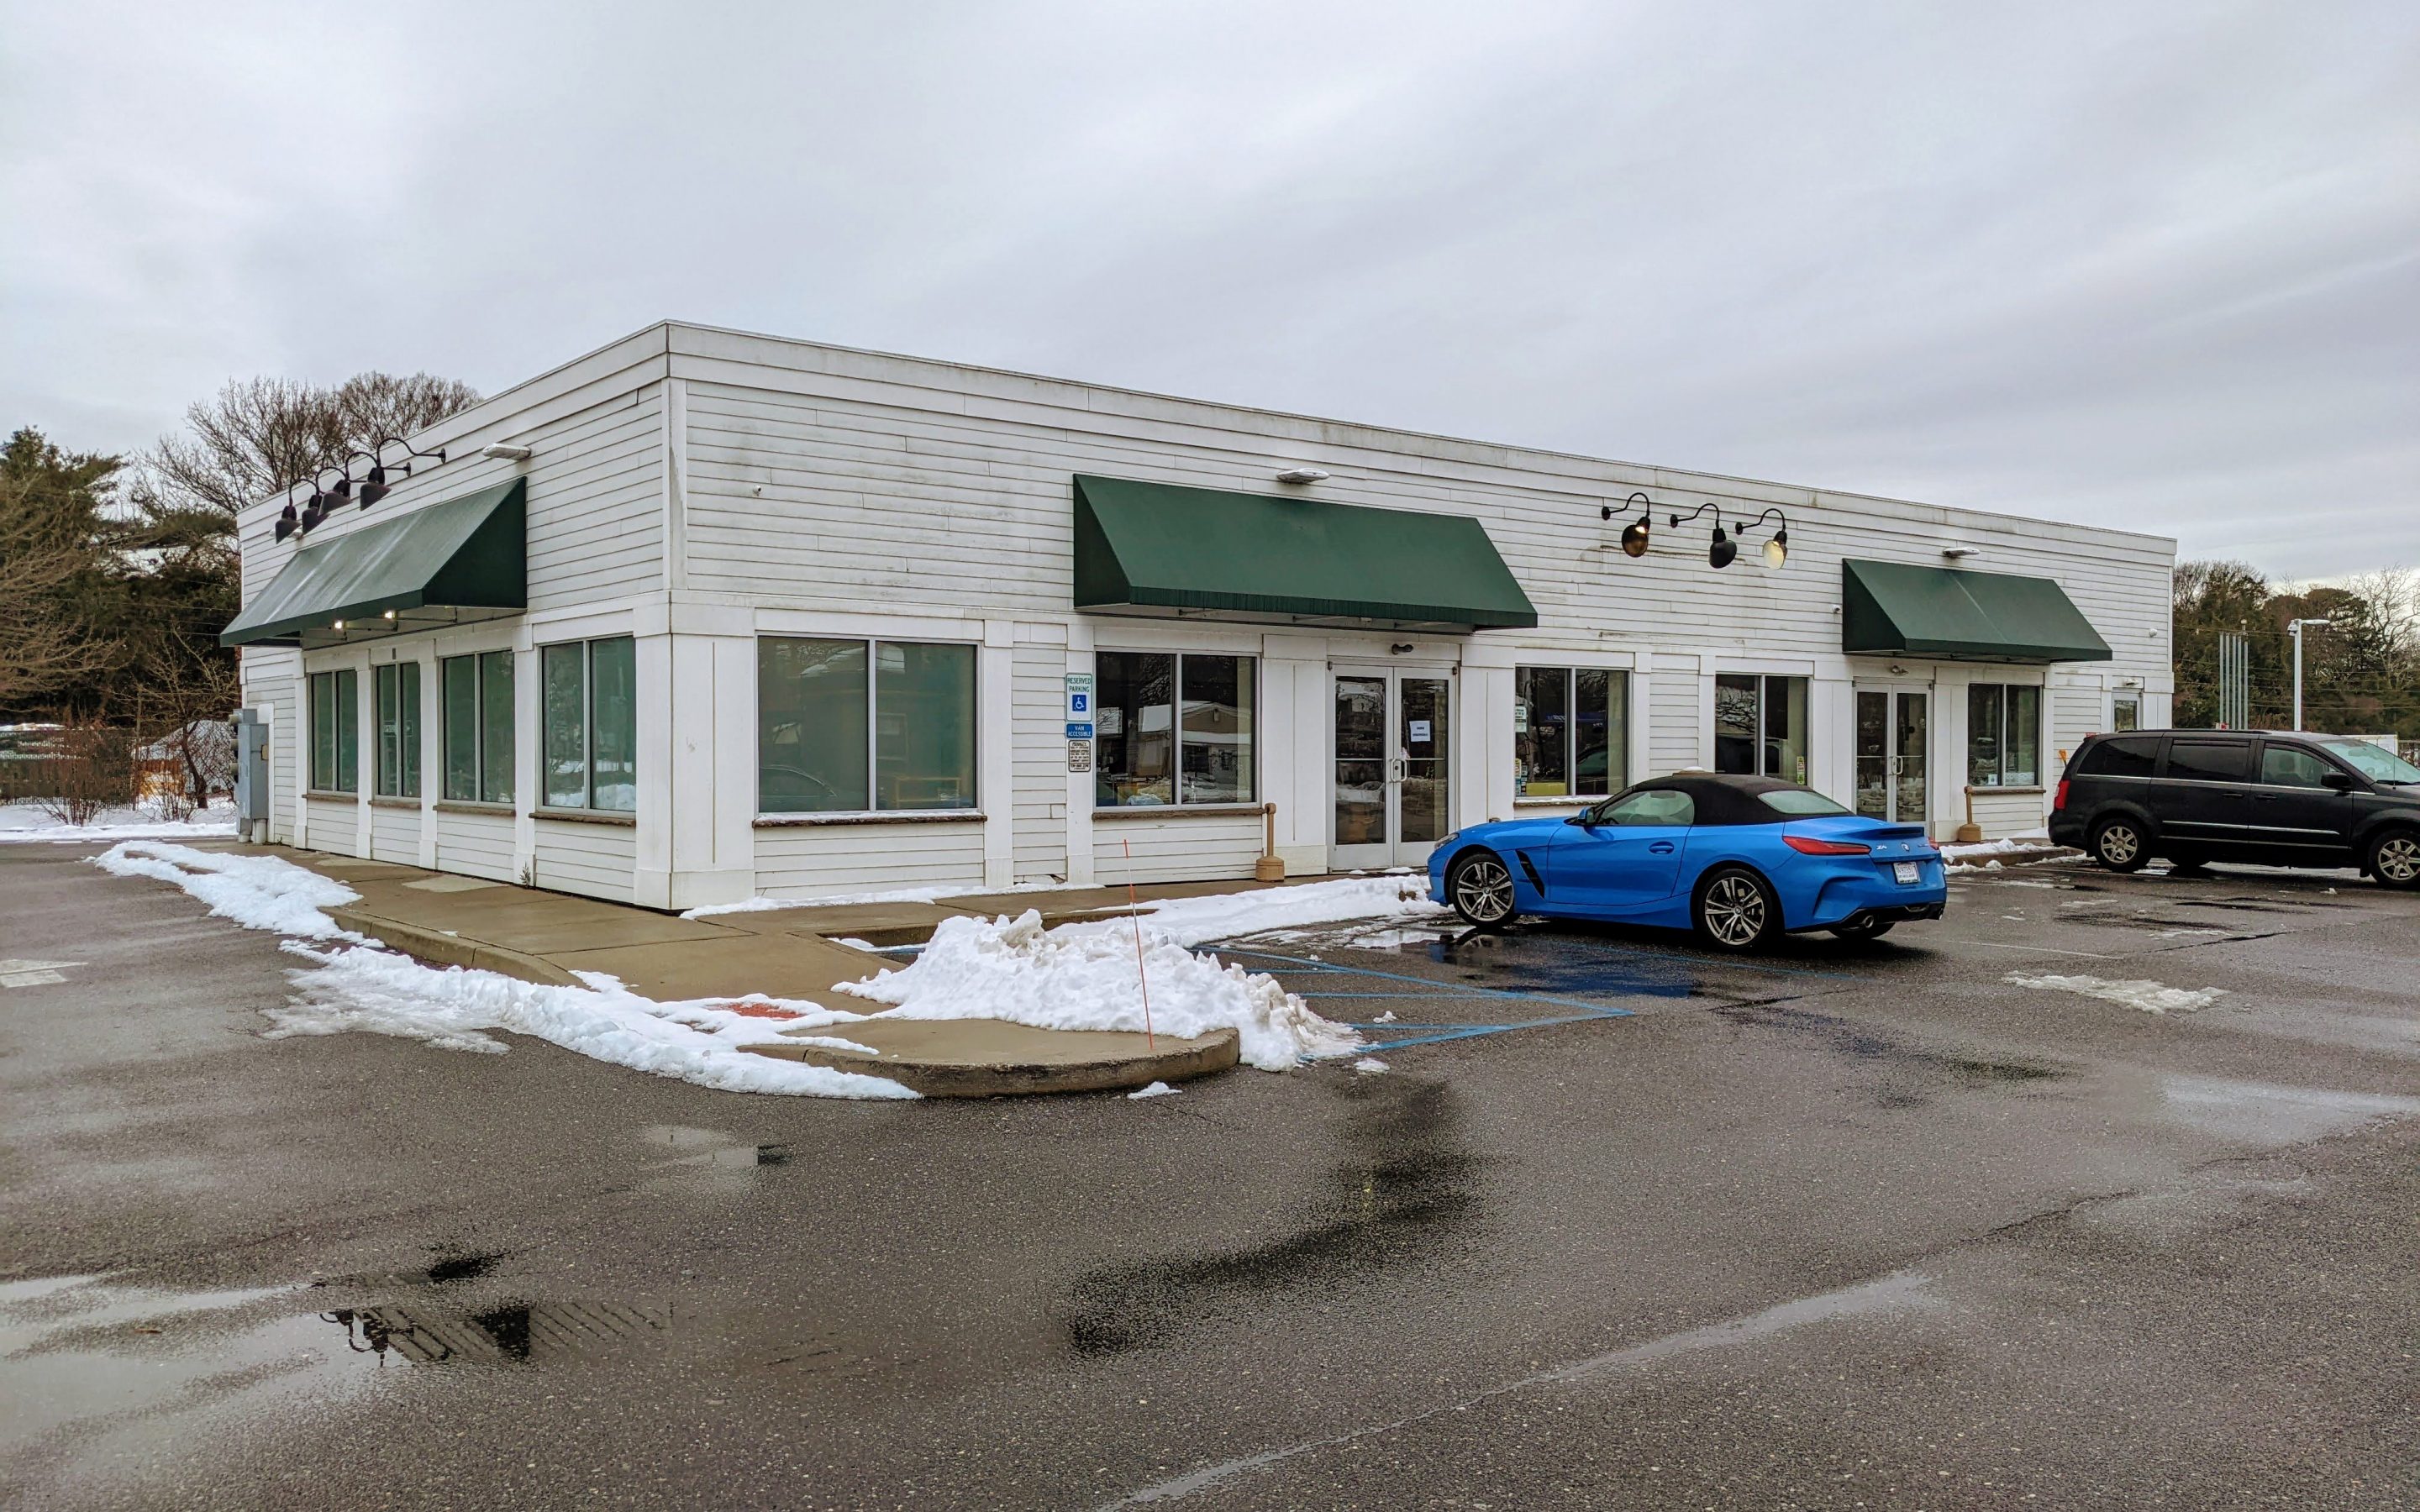 Lease Opportunity: 3800 sqft Retail Building, Cape May Courthouse